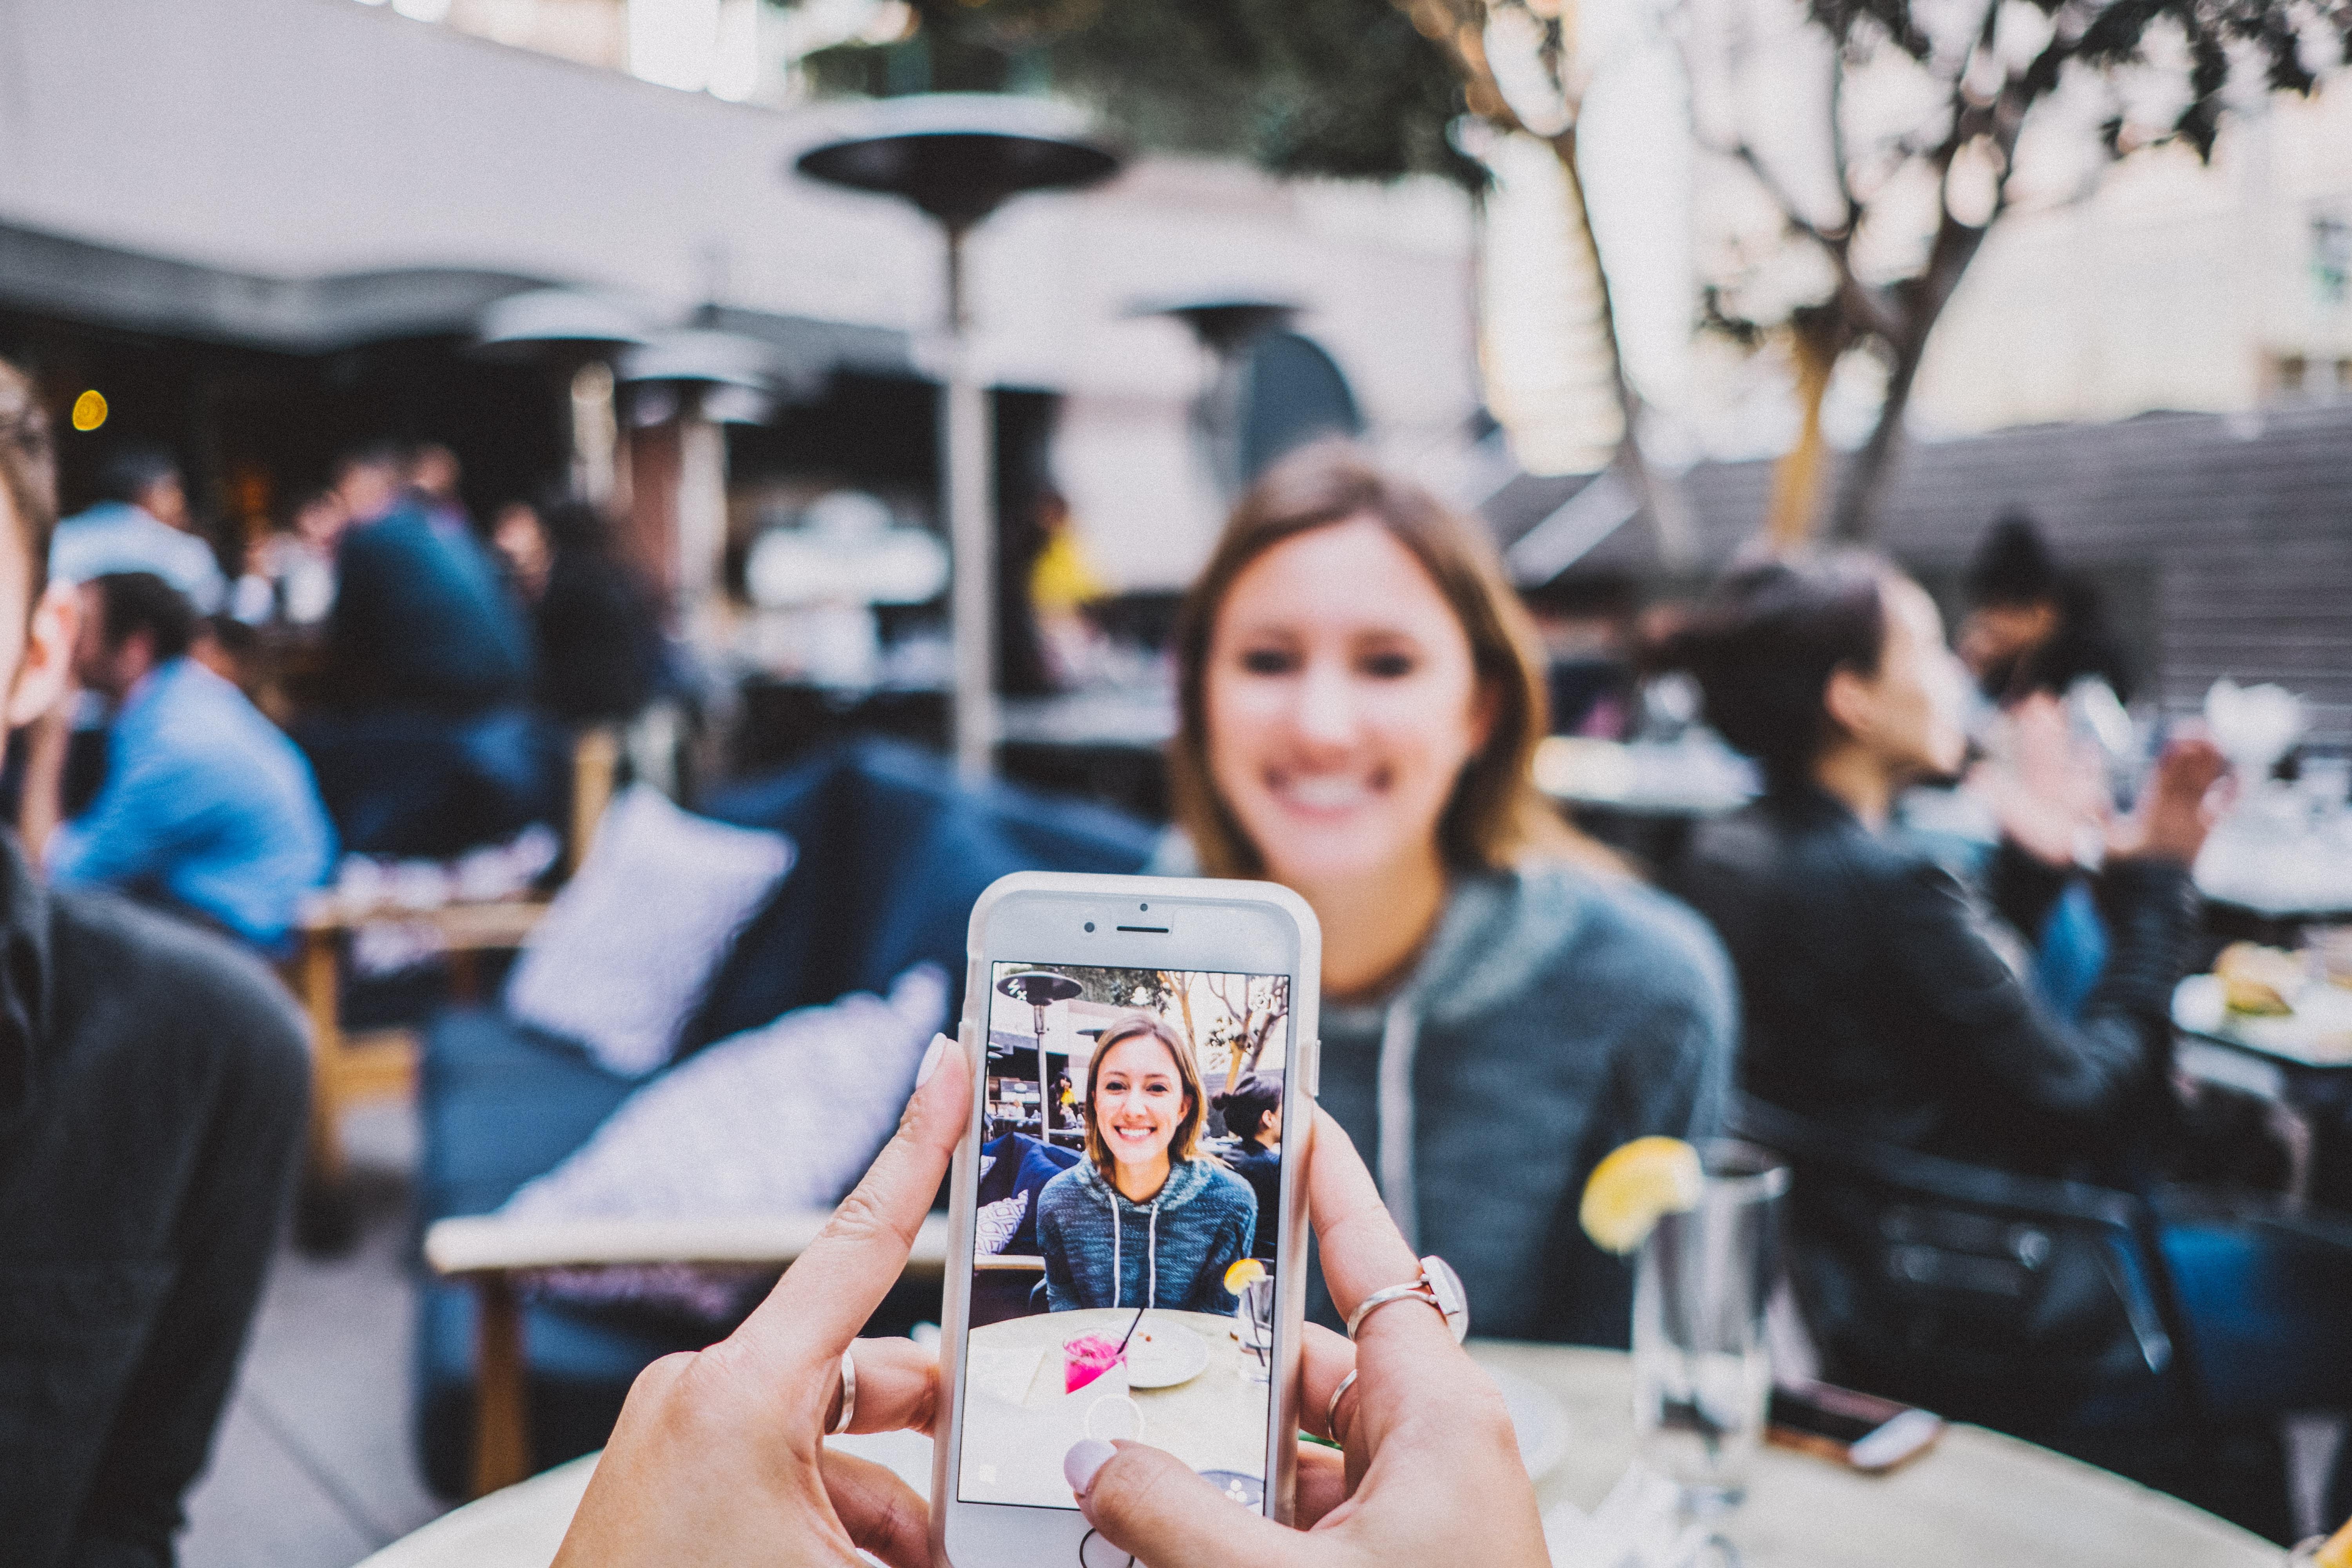 A person taking a photo of a smiling woman sitting at a table with an iPhone